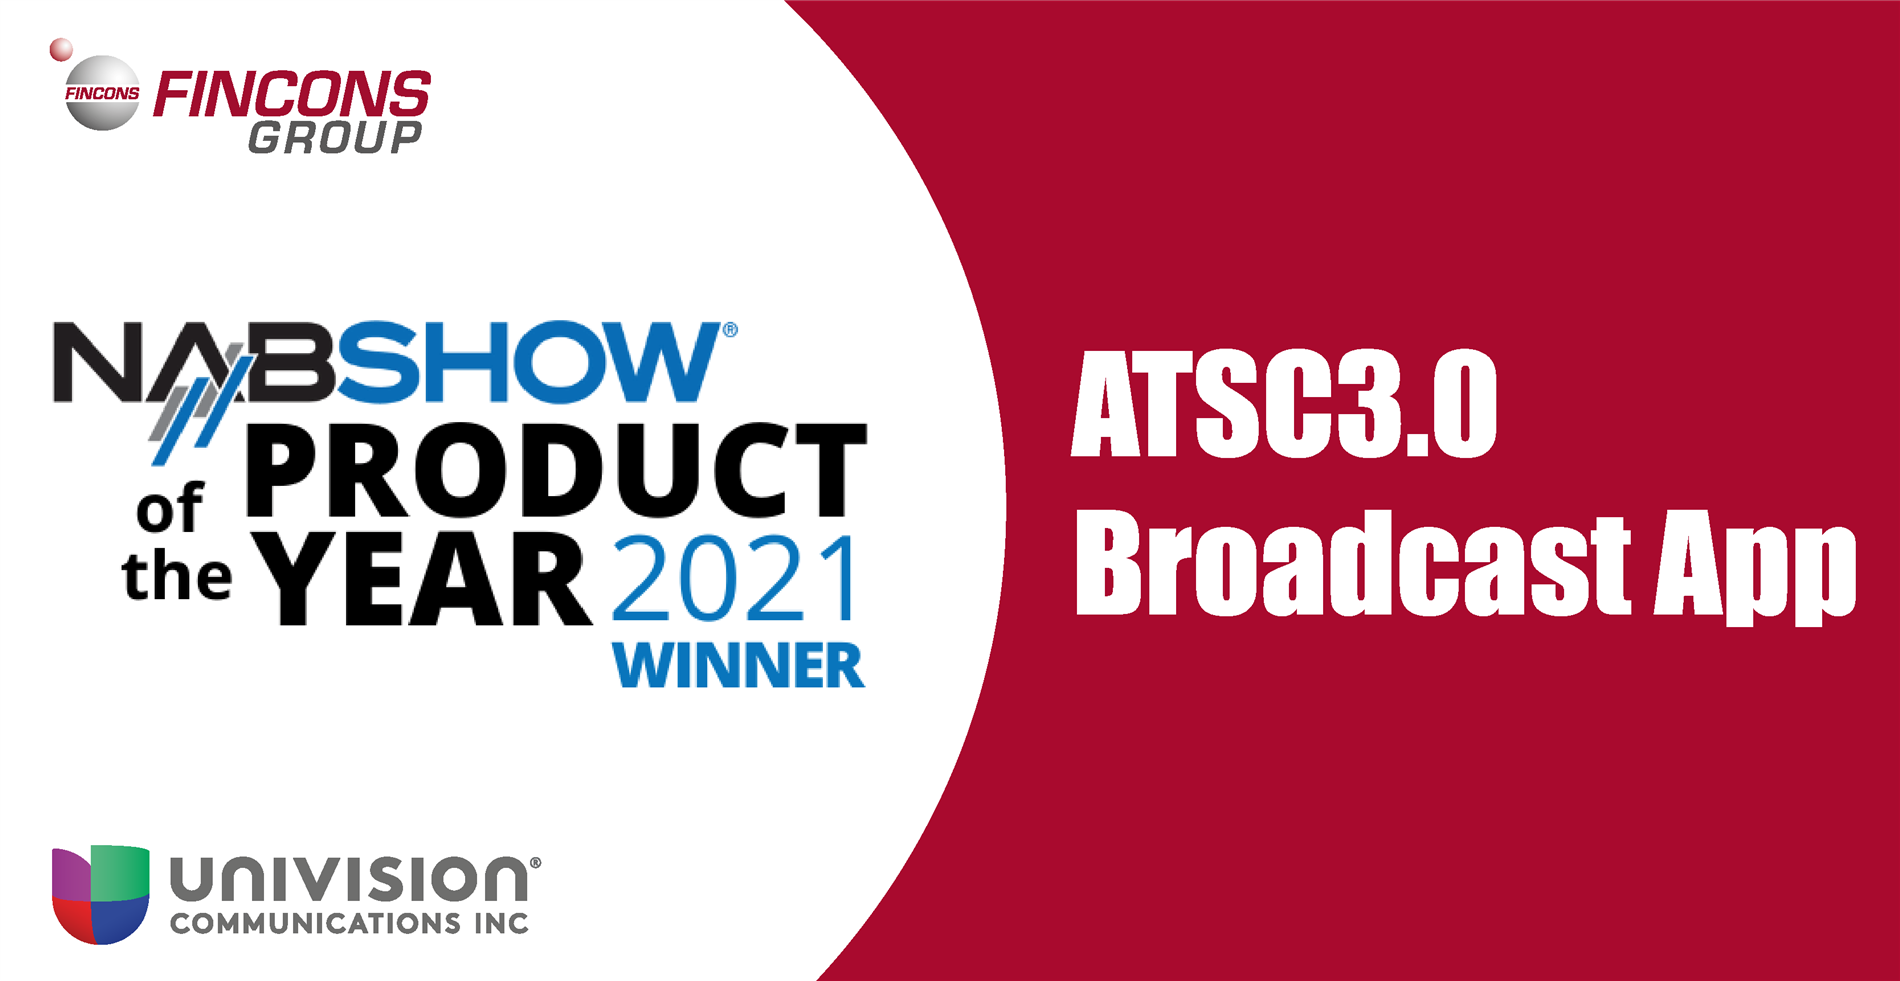 Fincons wins the 2021 NAB Show Product of the Year Award